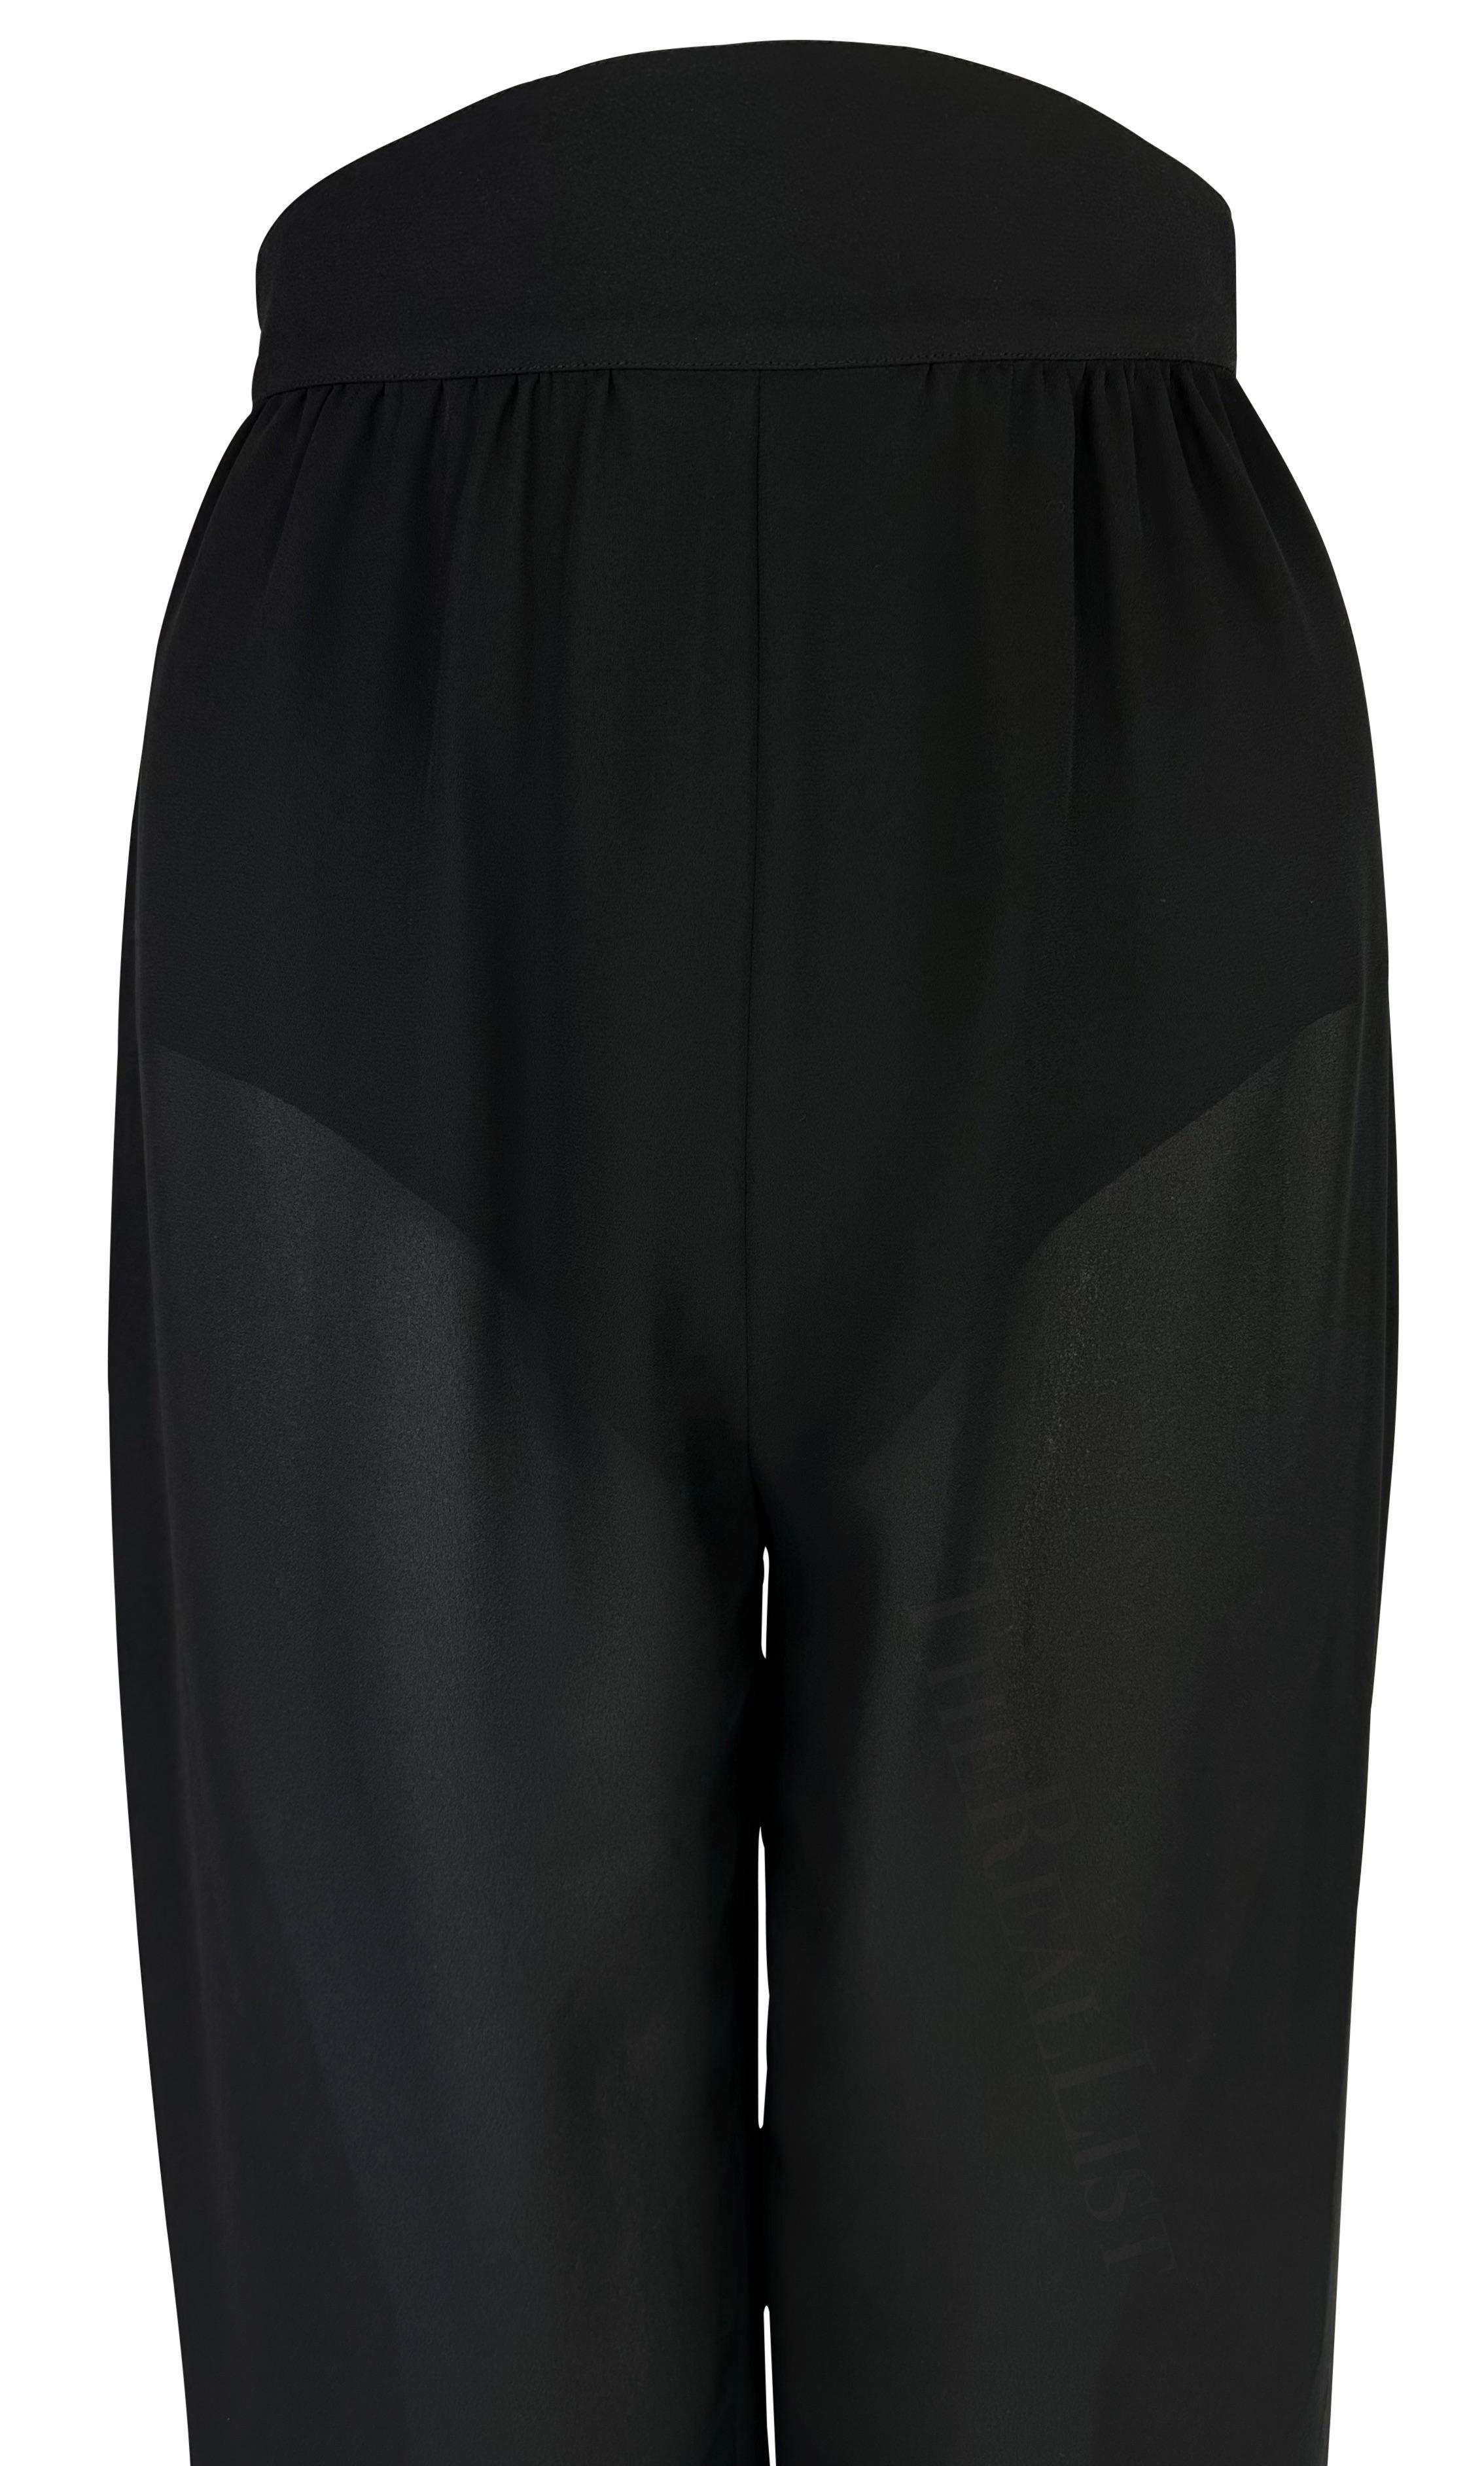 Presenting a pair of black sheer Thierry Mugler pants. From Mugler’s Cruise 1999 collection, these fabulous pants are entirely sheer and feature built-in shorts. Perfectly dressed up or down, these sexy lightweight pants are the perfect unique